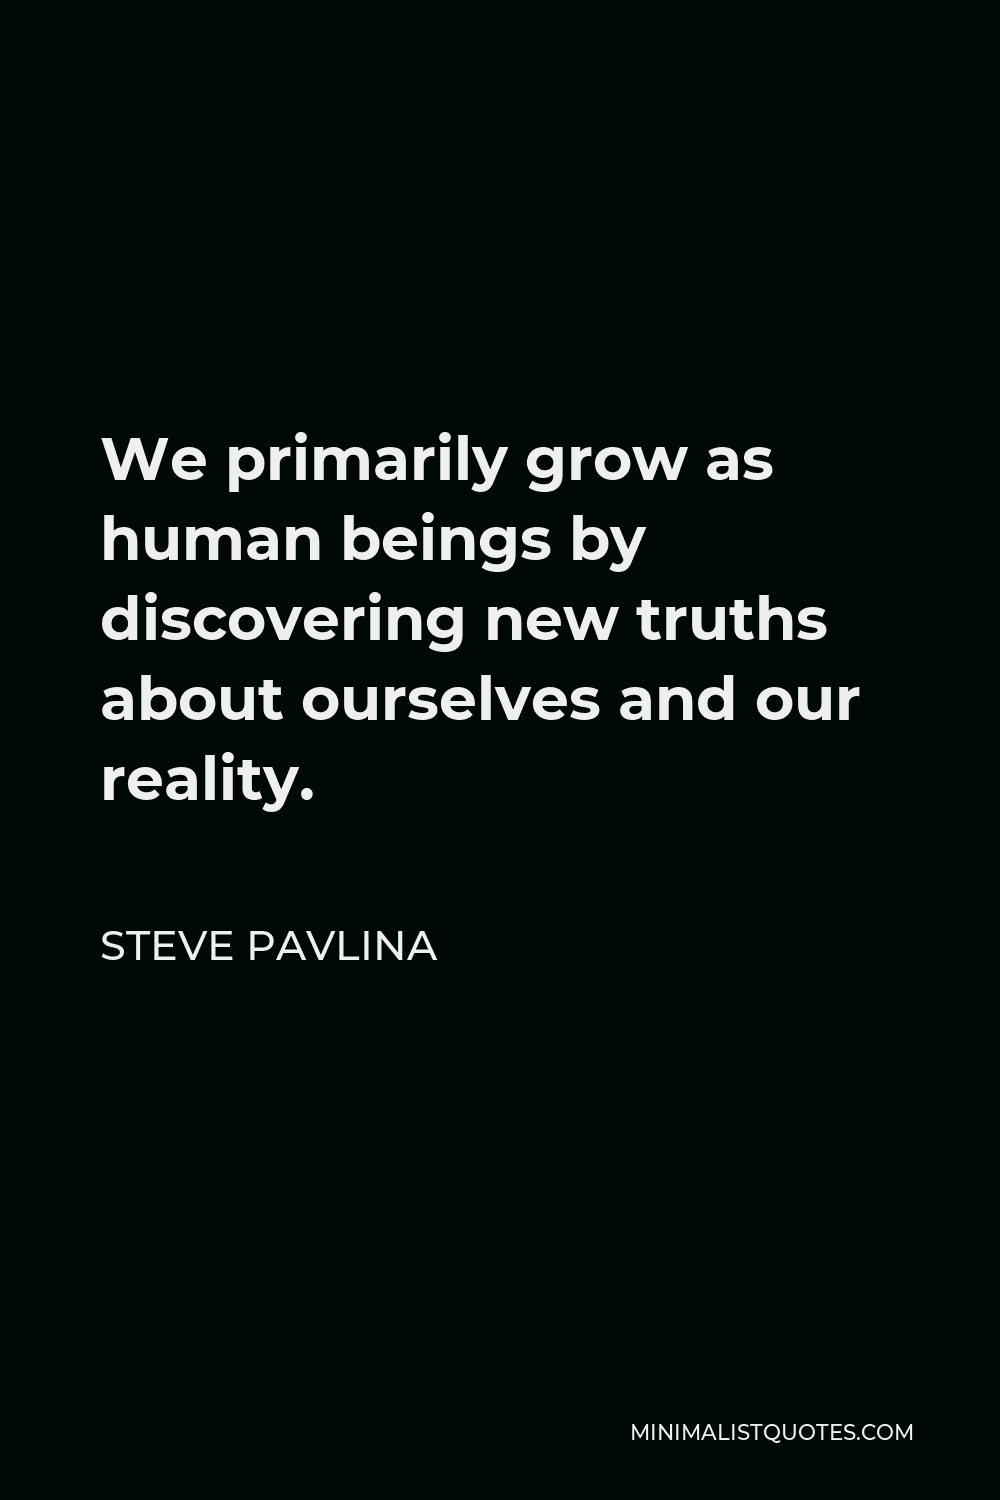 Steve Pavlina Quote - We primarily grow as human beings by discovering new truths about ourselves and our reality.